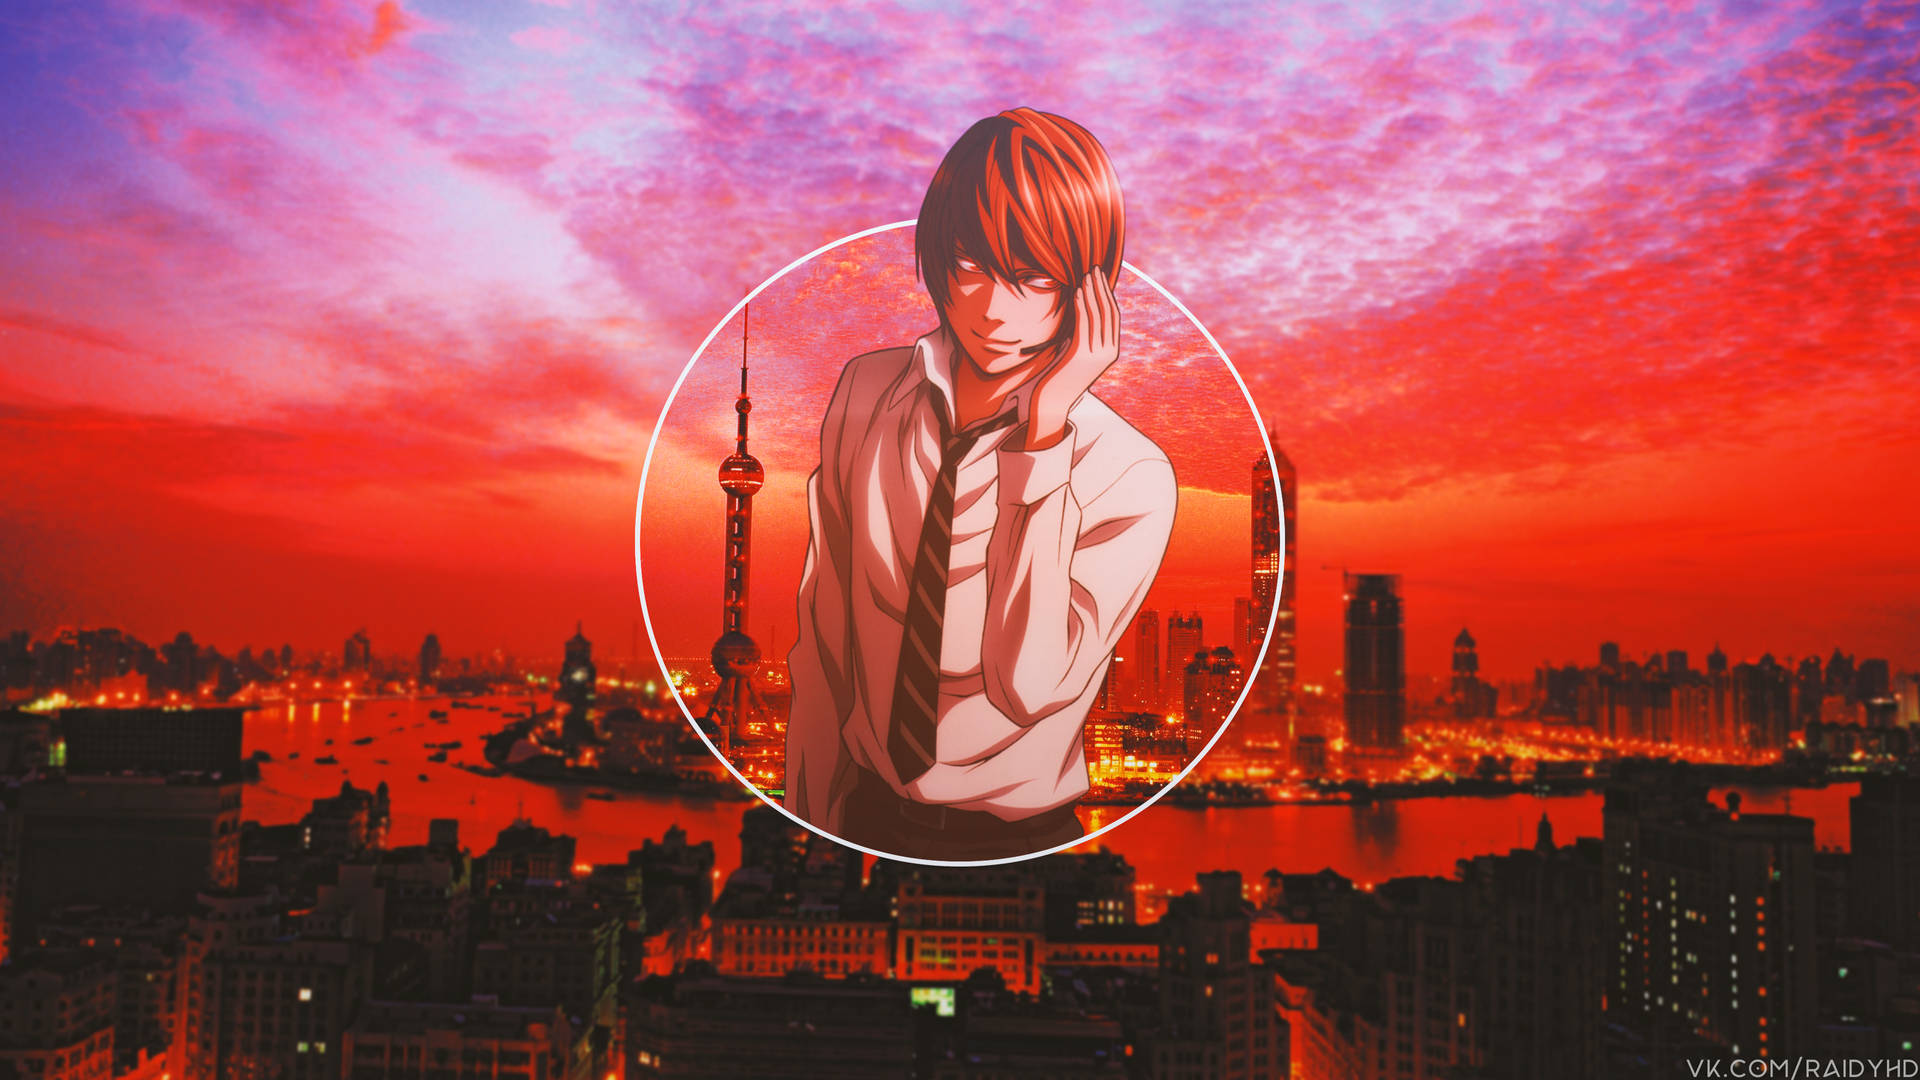 Aesthetic Sky With Light Yagami